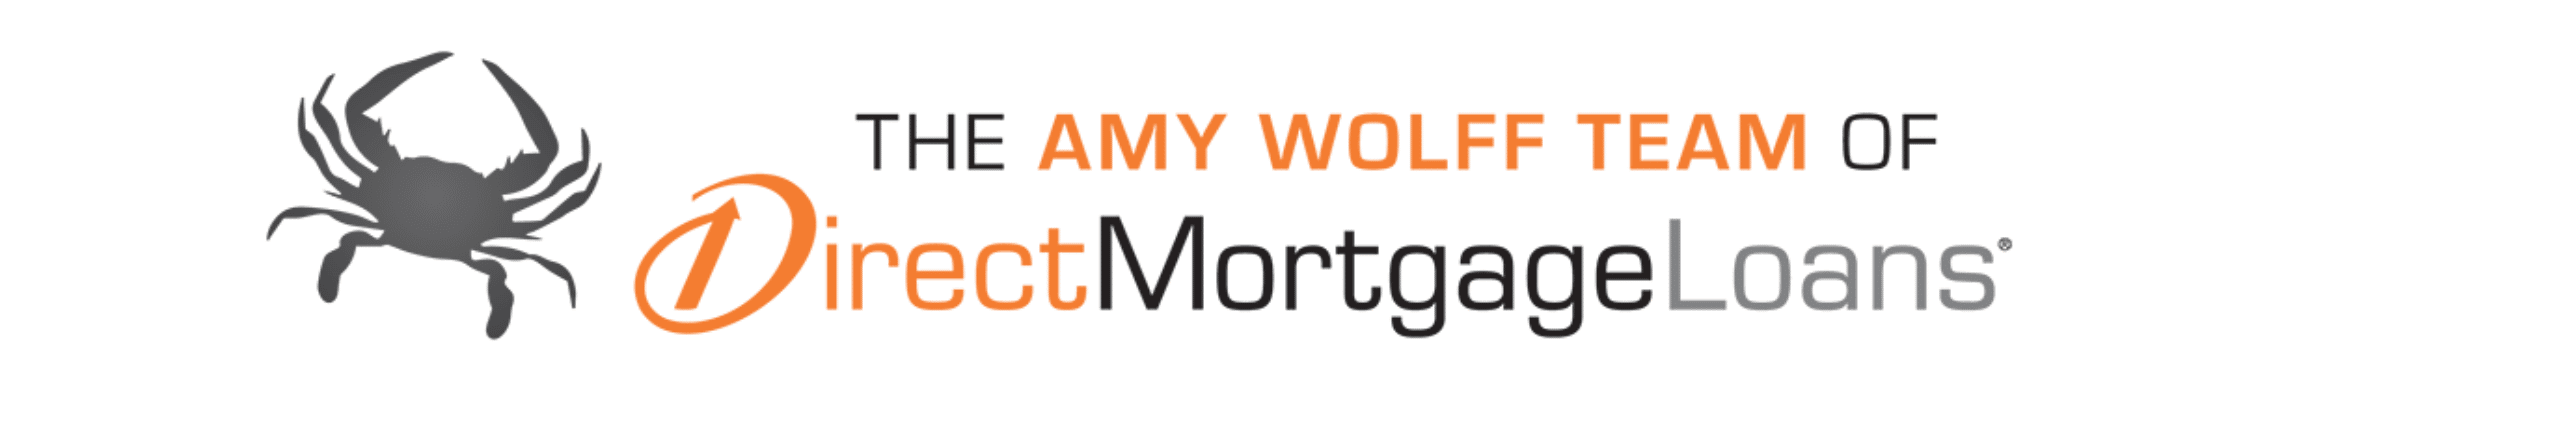 The Amy Wolff Team Logo